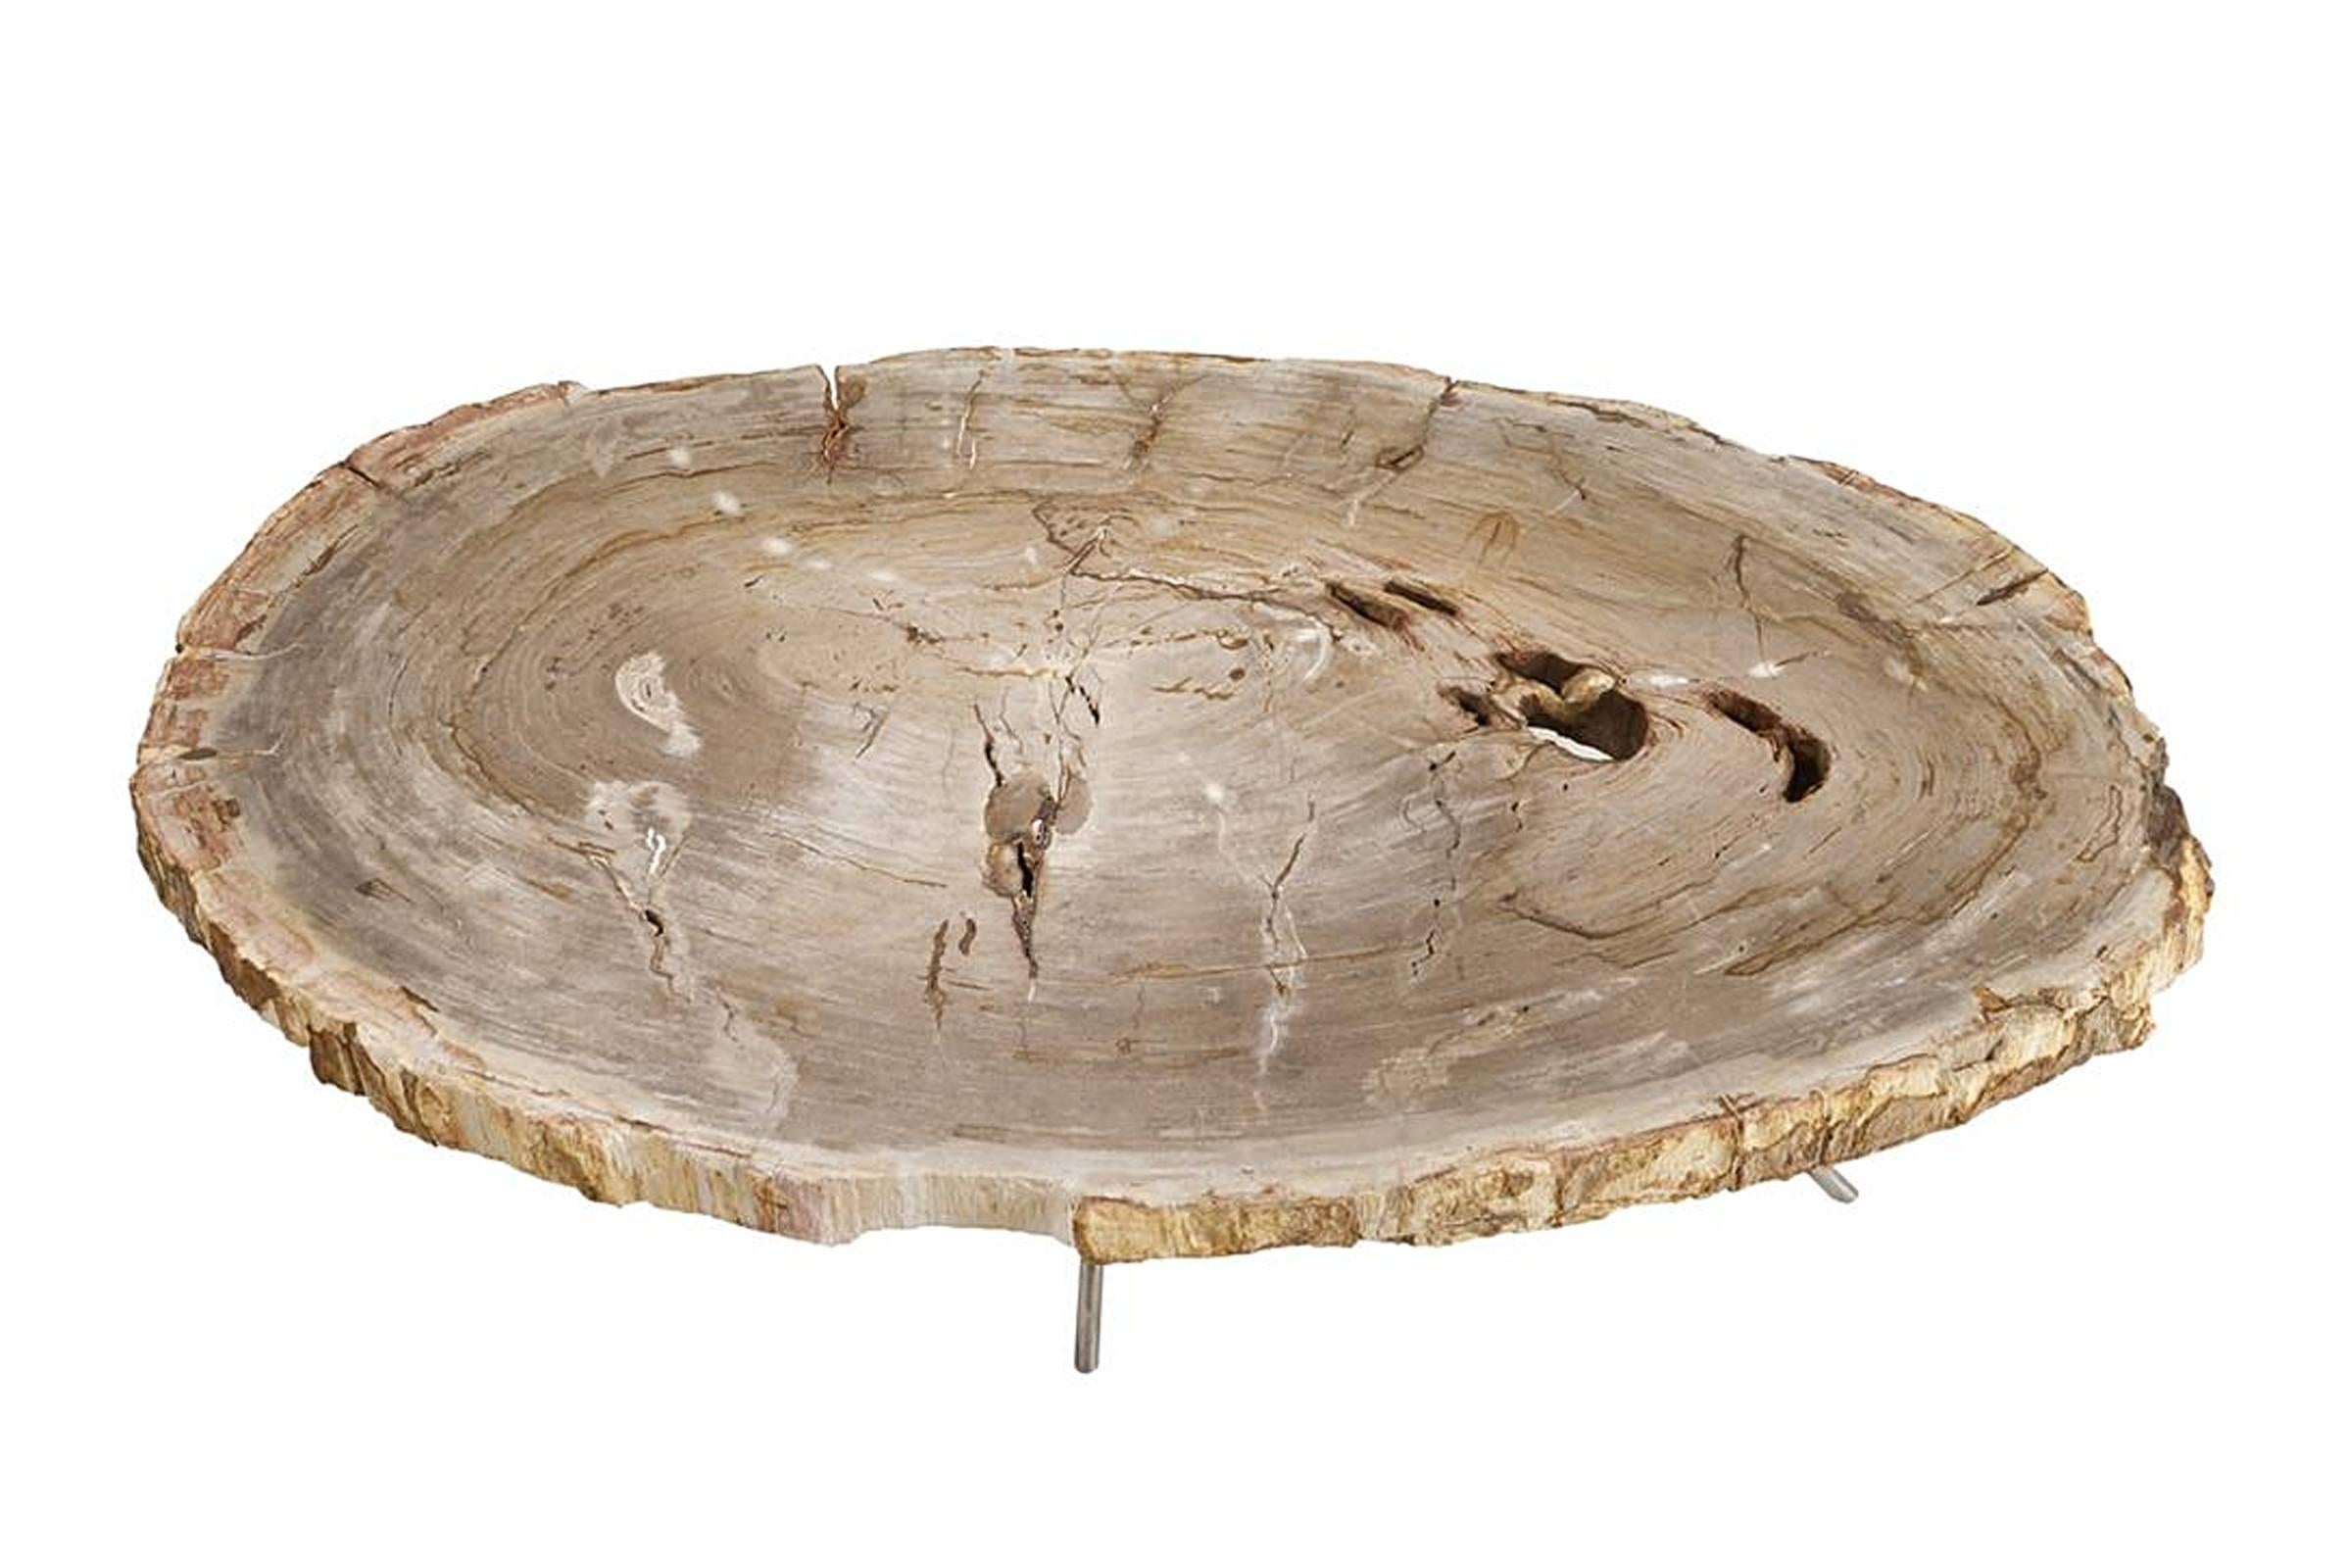 Coffee table stoned petrified wood with polished
stainless steel base. Petrified wood has turned into 
stone. Trees have been buried for many years under 
sediment they transitioned into stone. Each piece is 
unique. Exceptional piece.
 